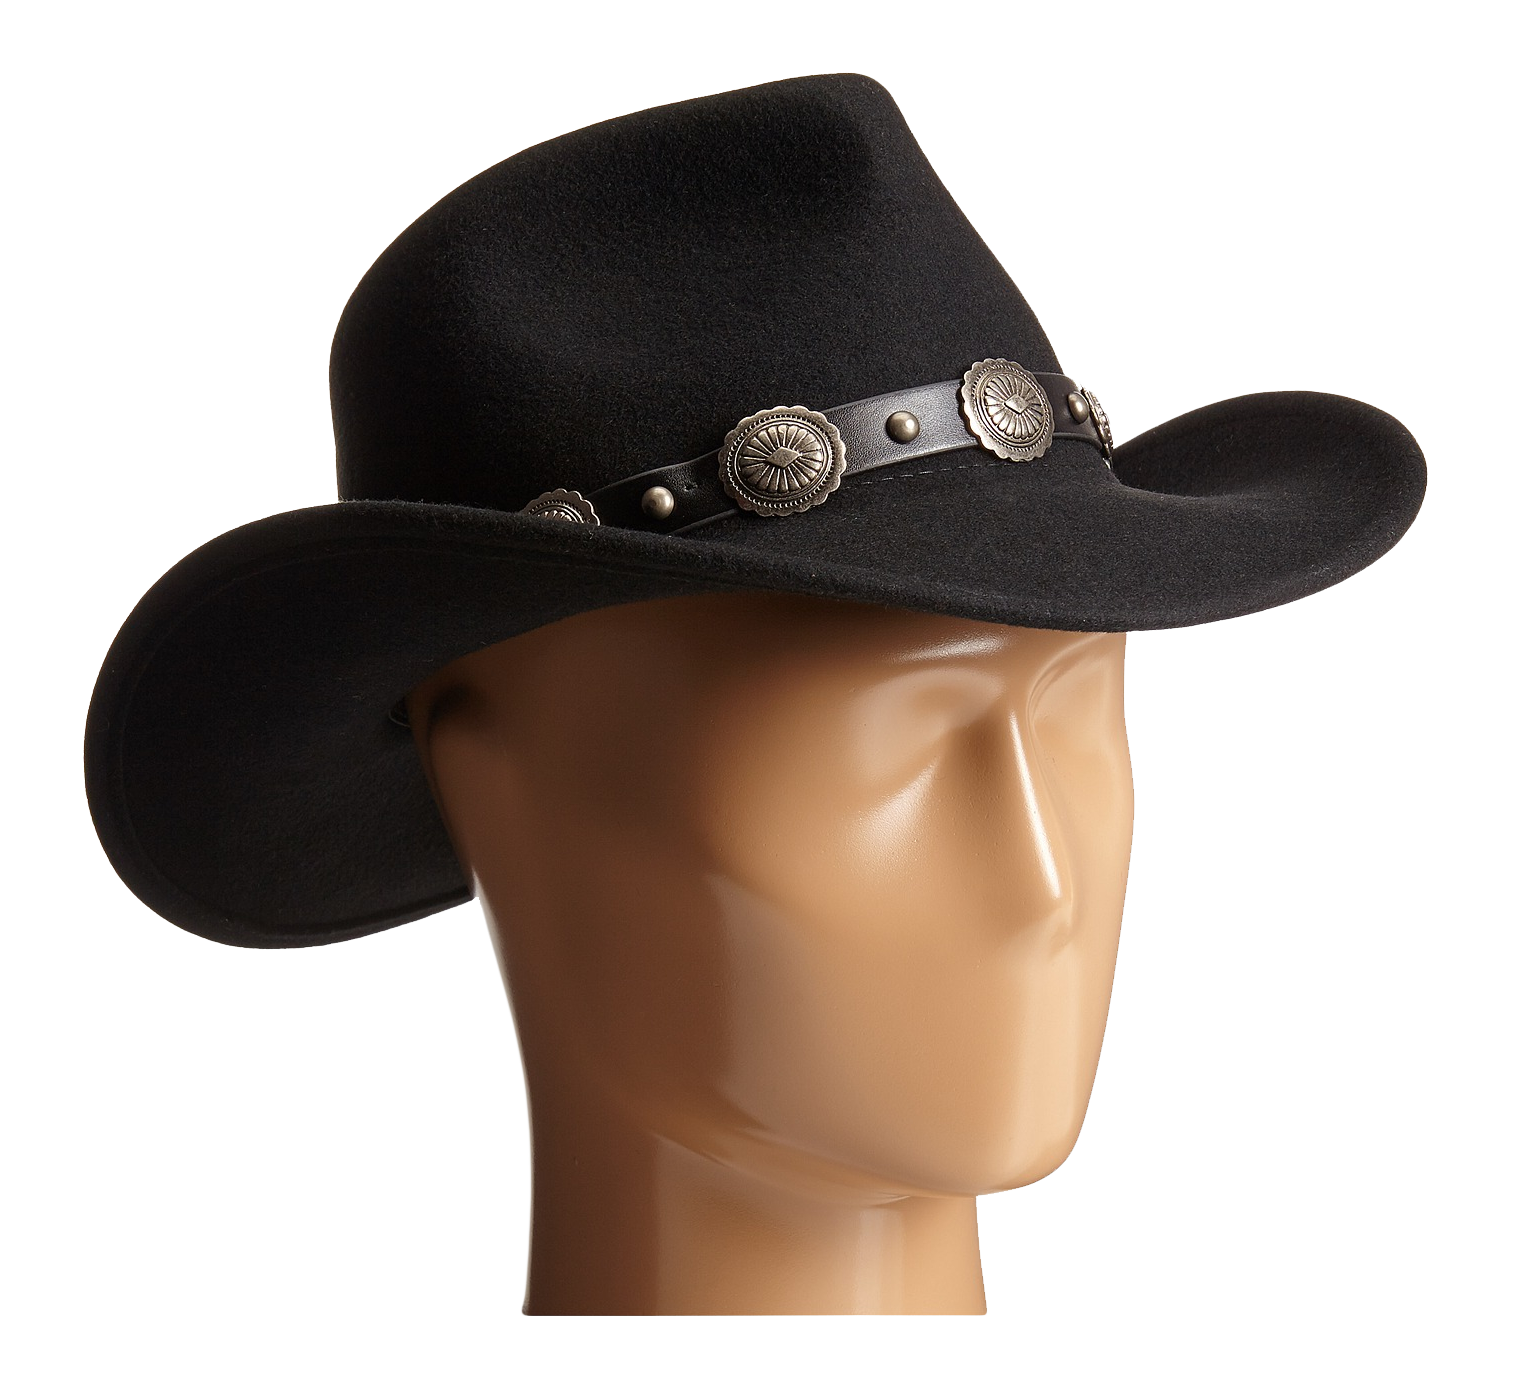 A Black Hat With Silver Buckles